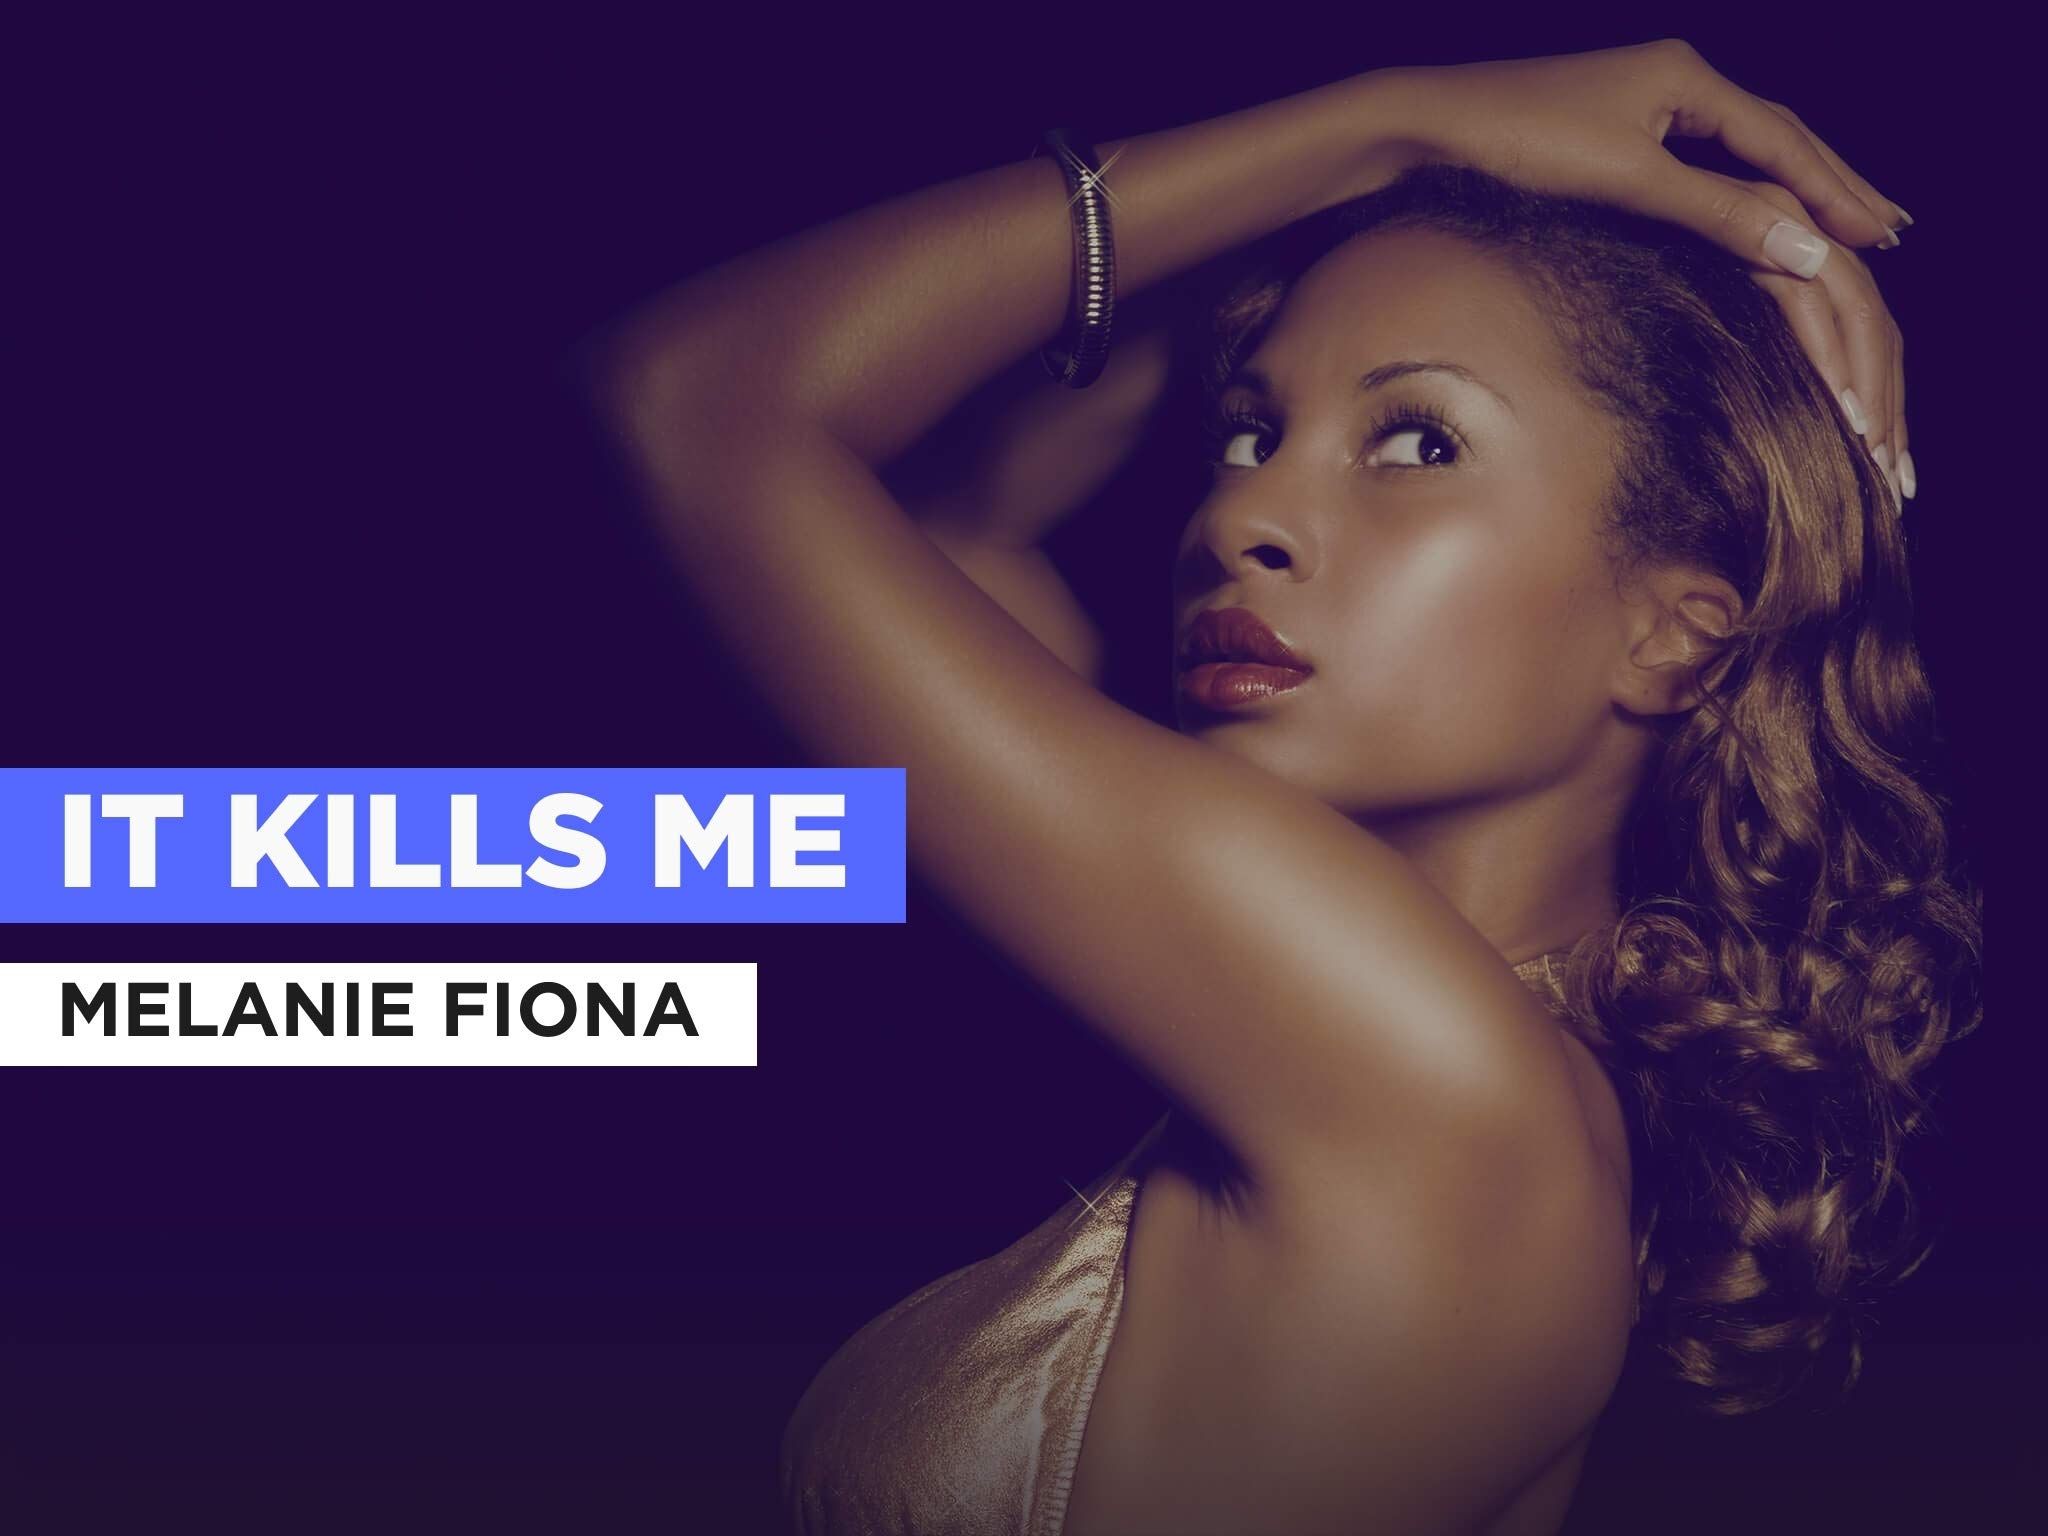 Watch It Kills Me in the Style of Melanie Fiona